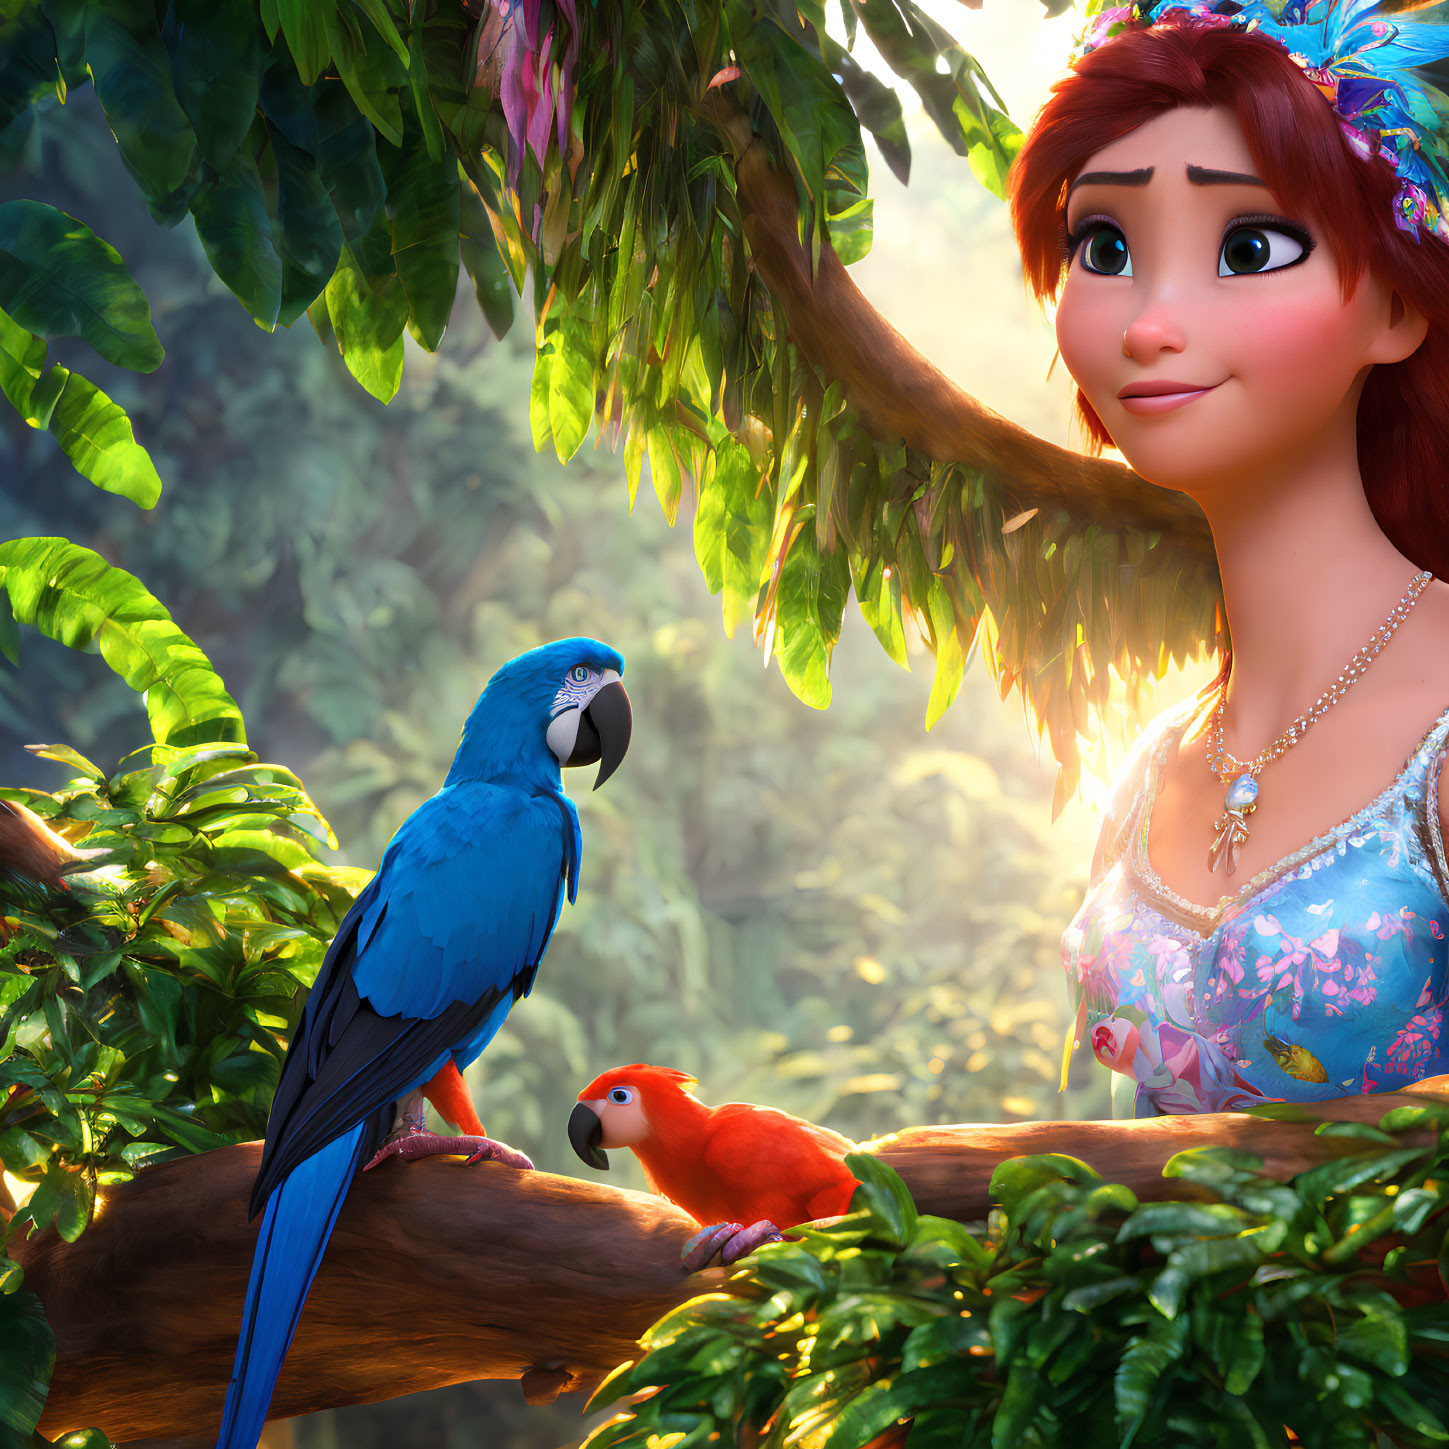 Smiling animated girl with blue top in jungle with macaw and red bird